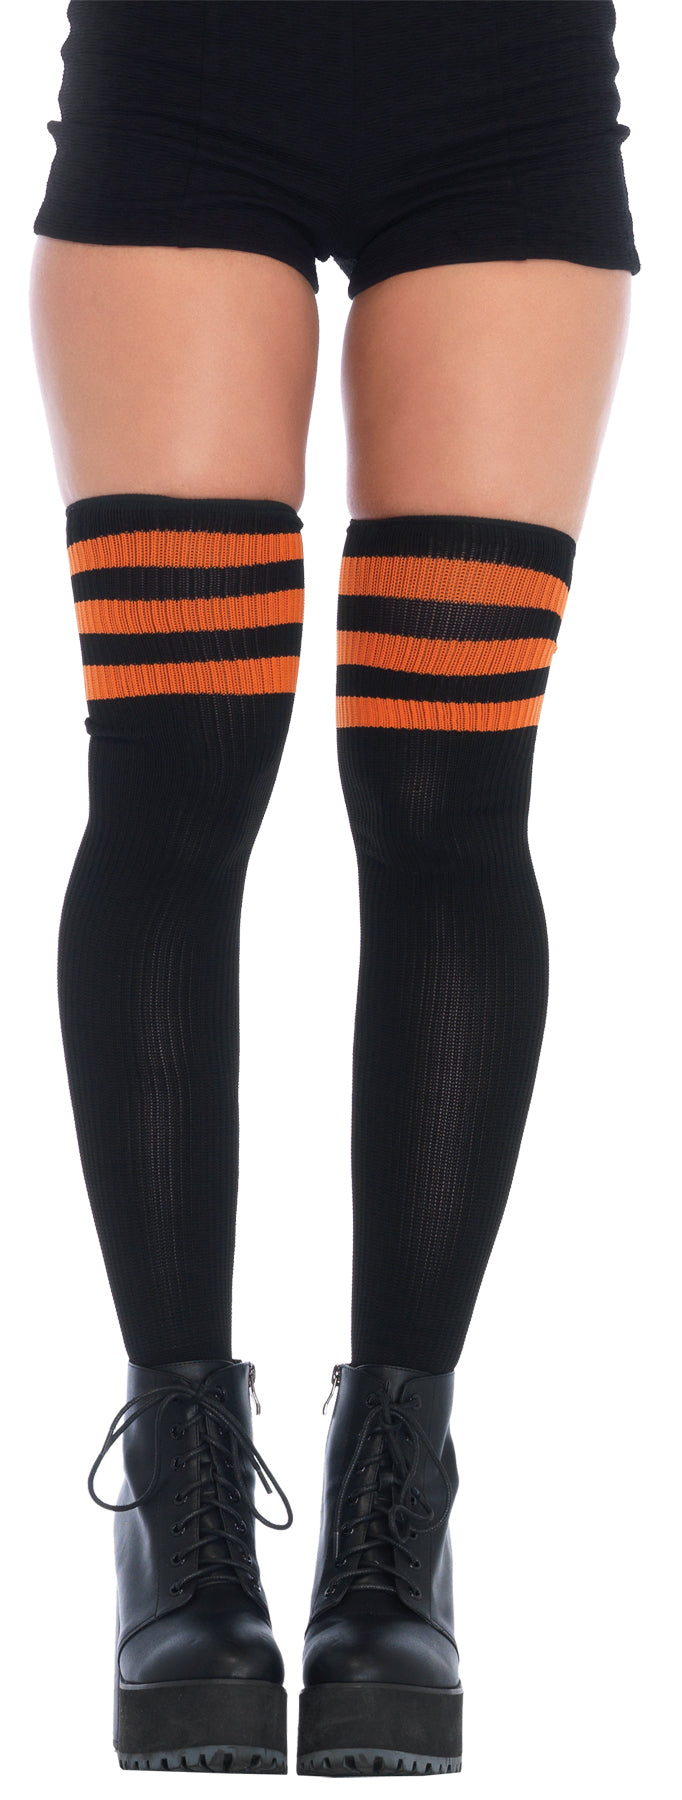 Athletic Ribbed Thigh High Socks from Leg Avenue